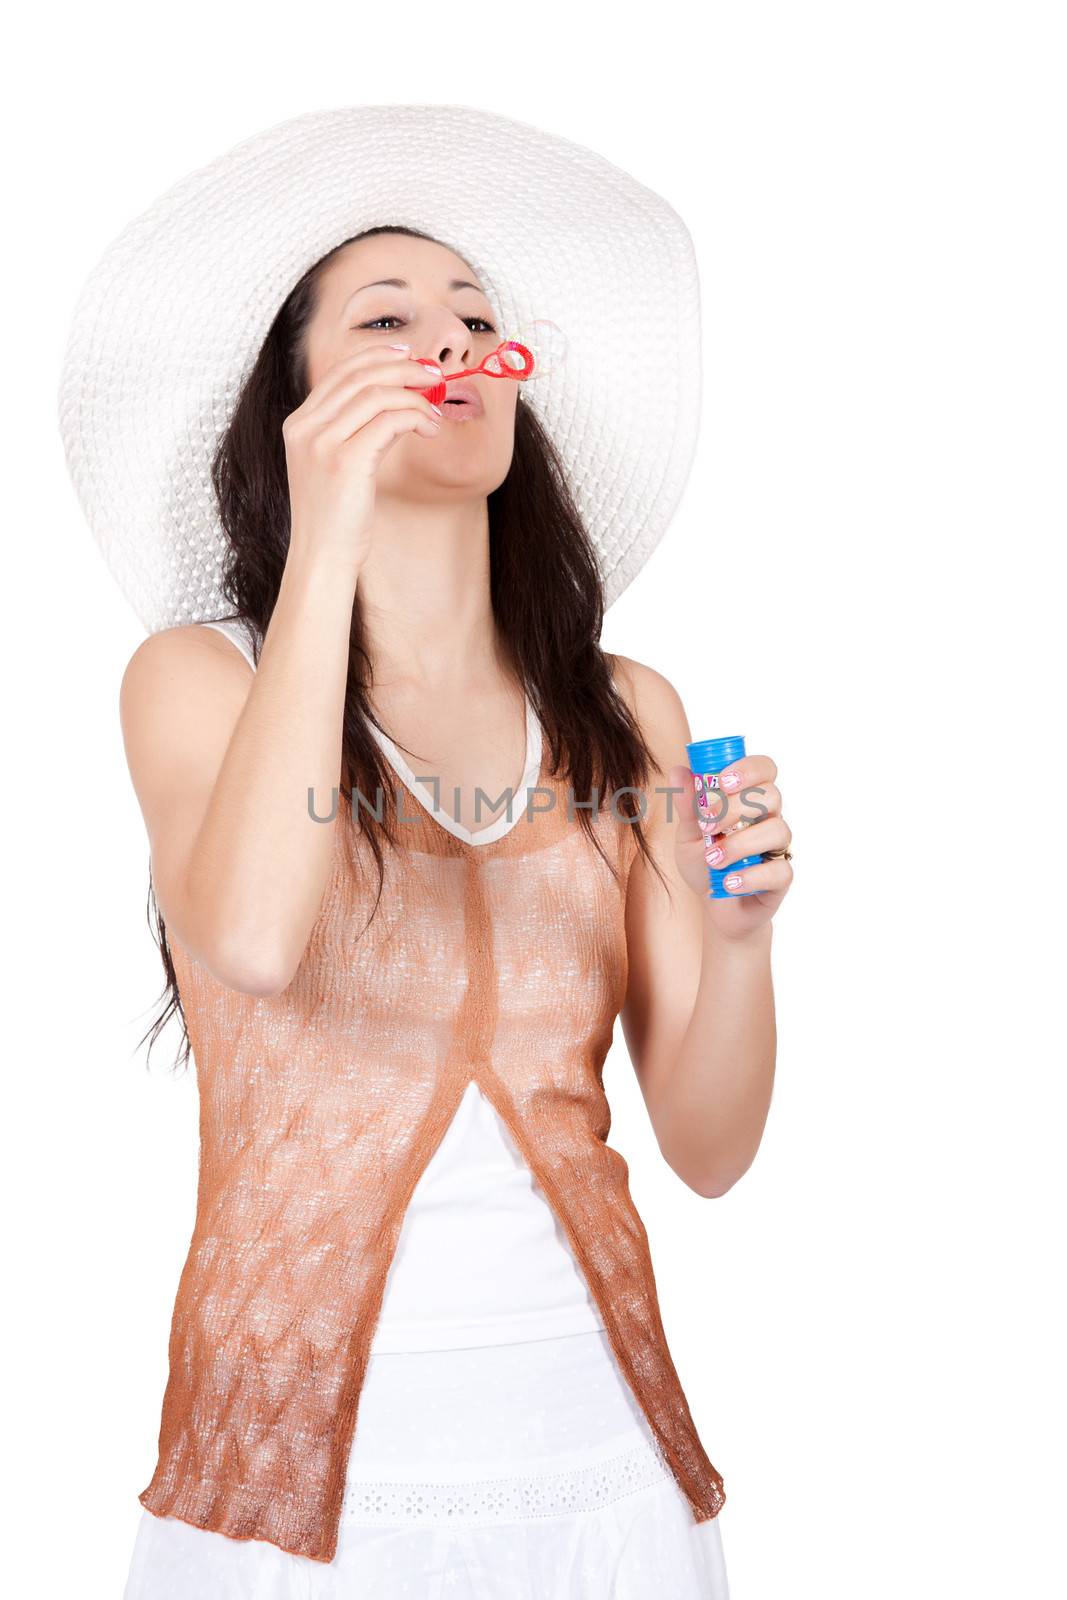 Brunette woman in white sun hat in a white dress, on white background, blowing and makes soap bubble